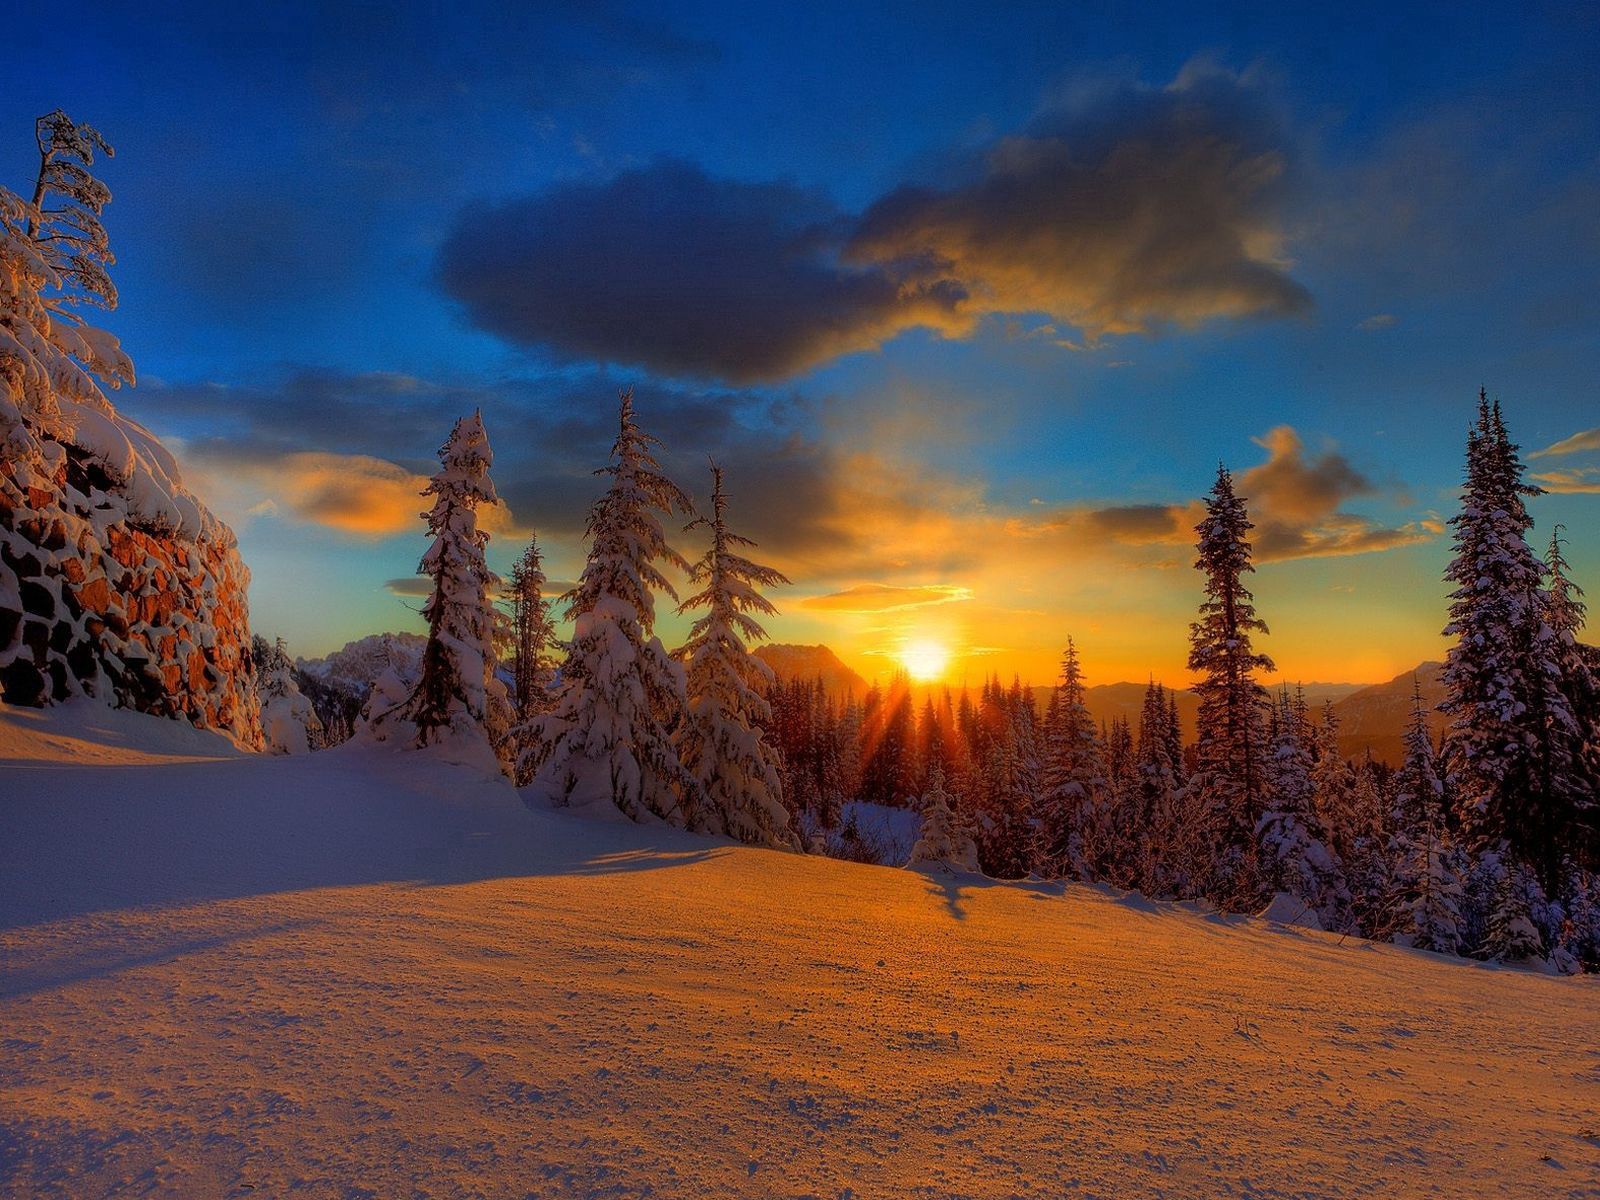 Free HD sun, nature, trees, sunset, snow, shadow, evening, ate